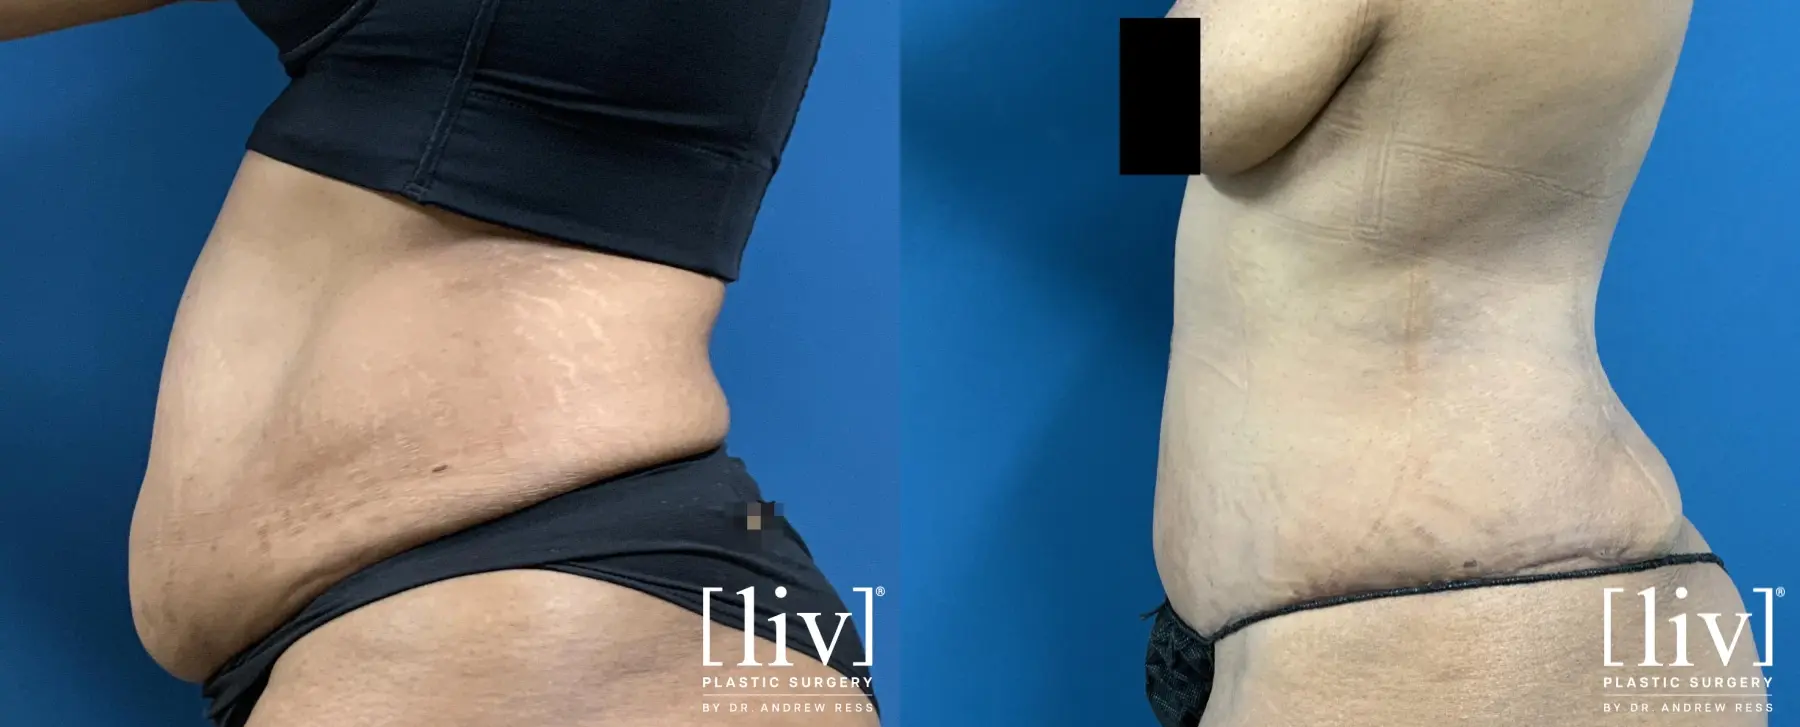 Lipoabdominoplasty - Before and After 3